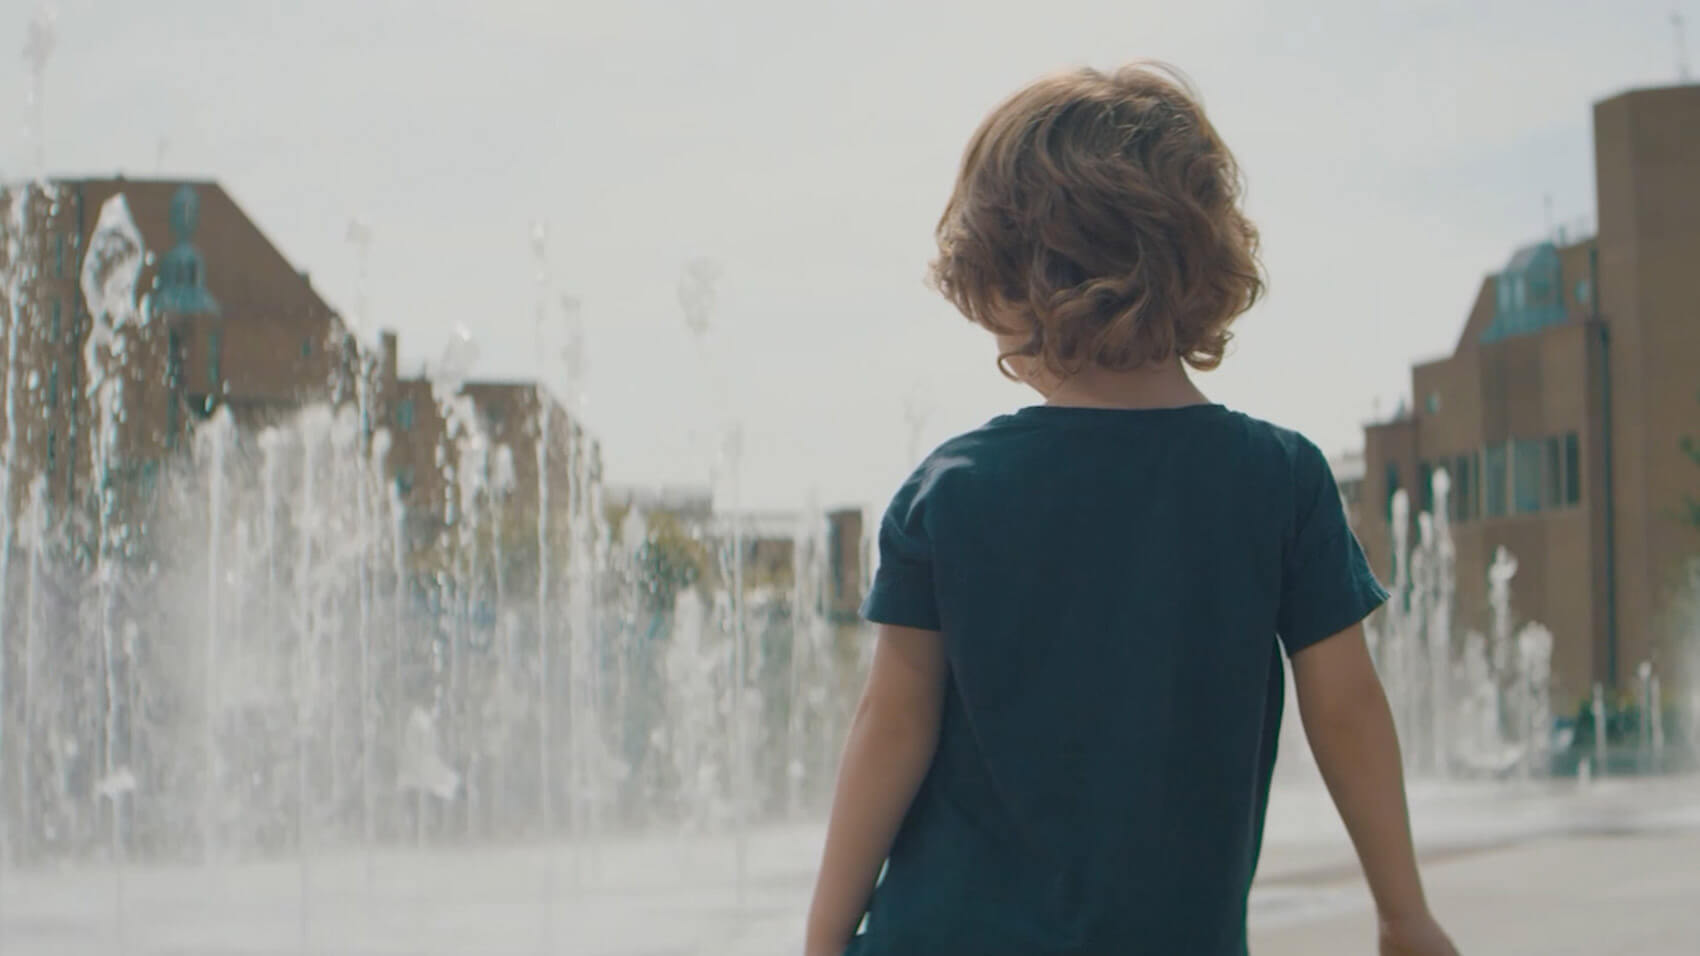 A boy plays in fountains in a still from a property video production by Spaces and Rise Media